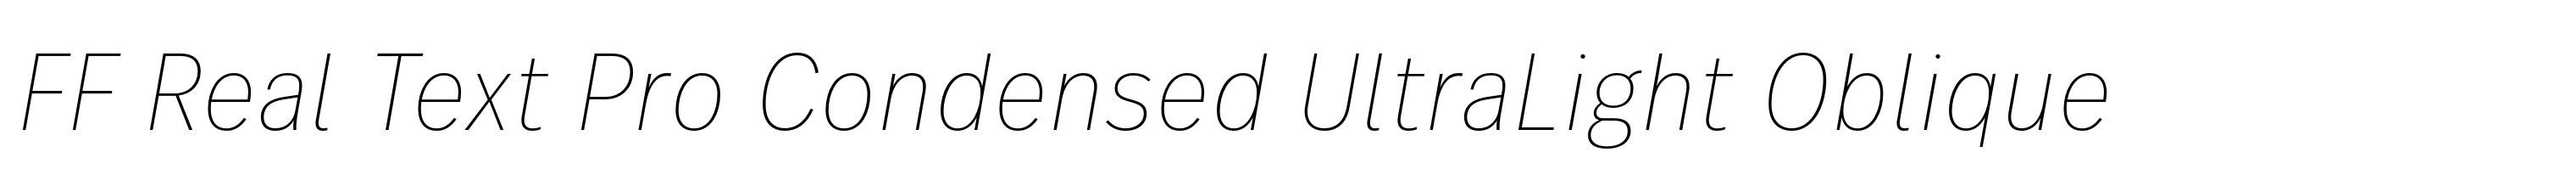 FF Real Text Pro Condensed UltraLight Oblique